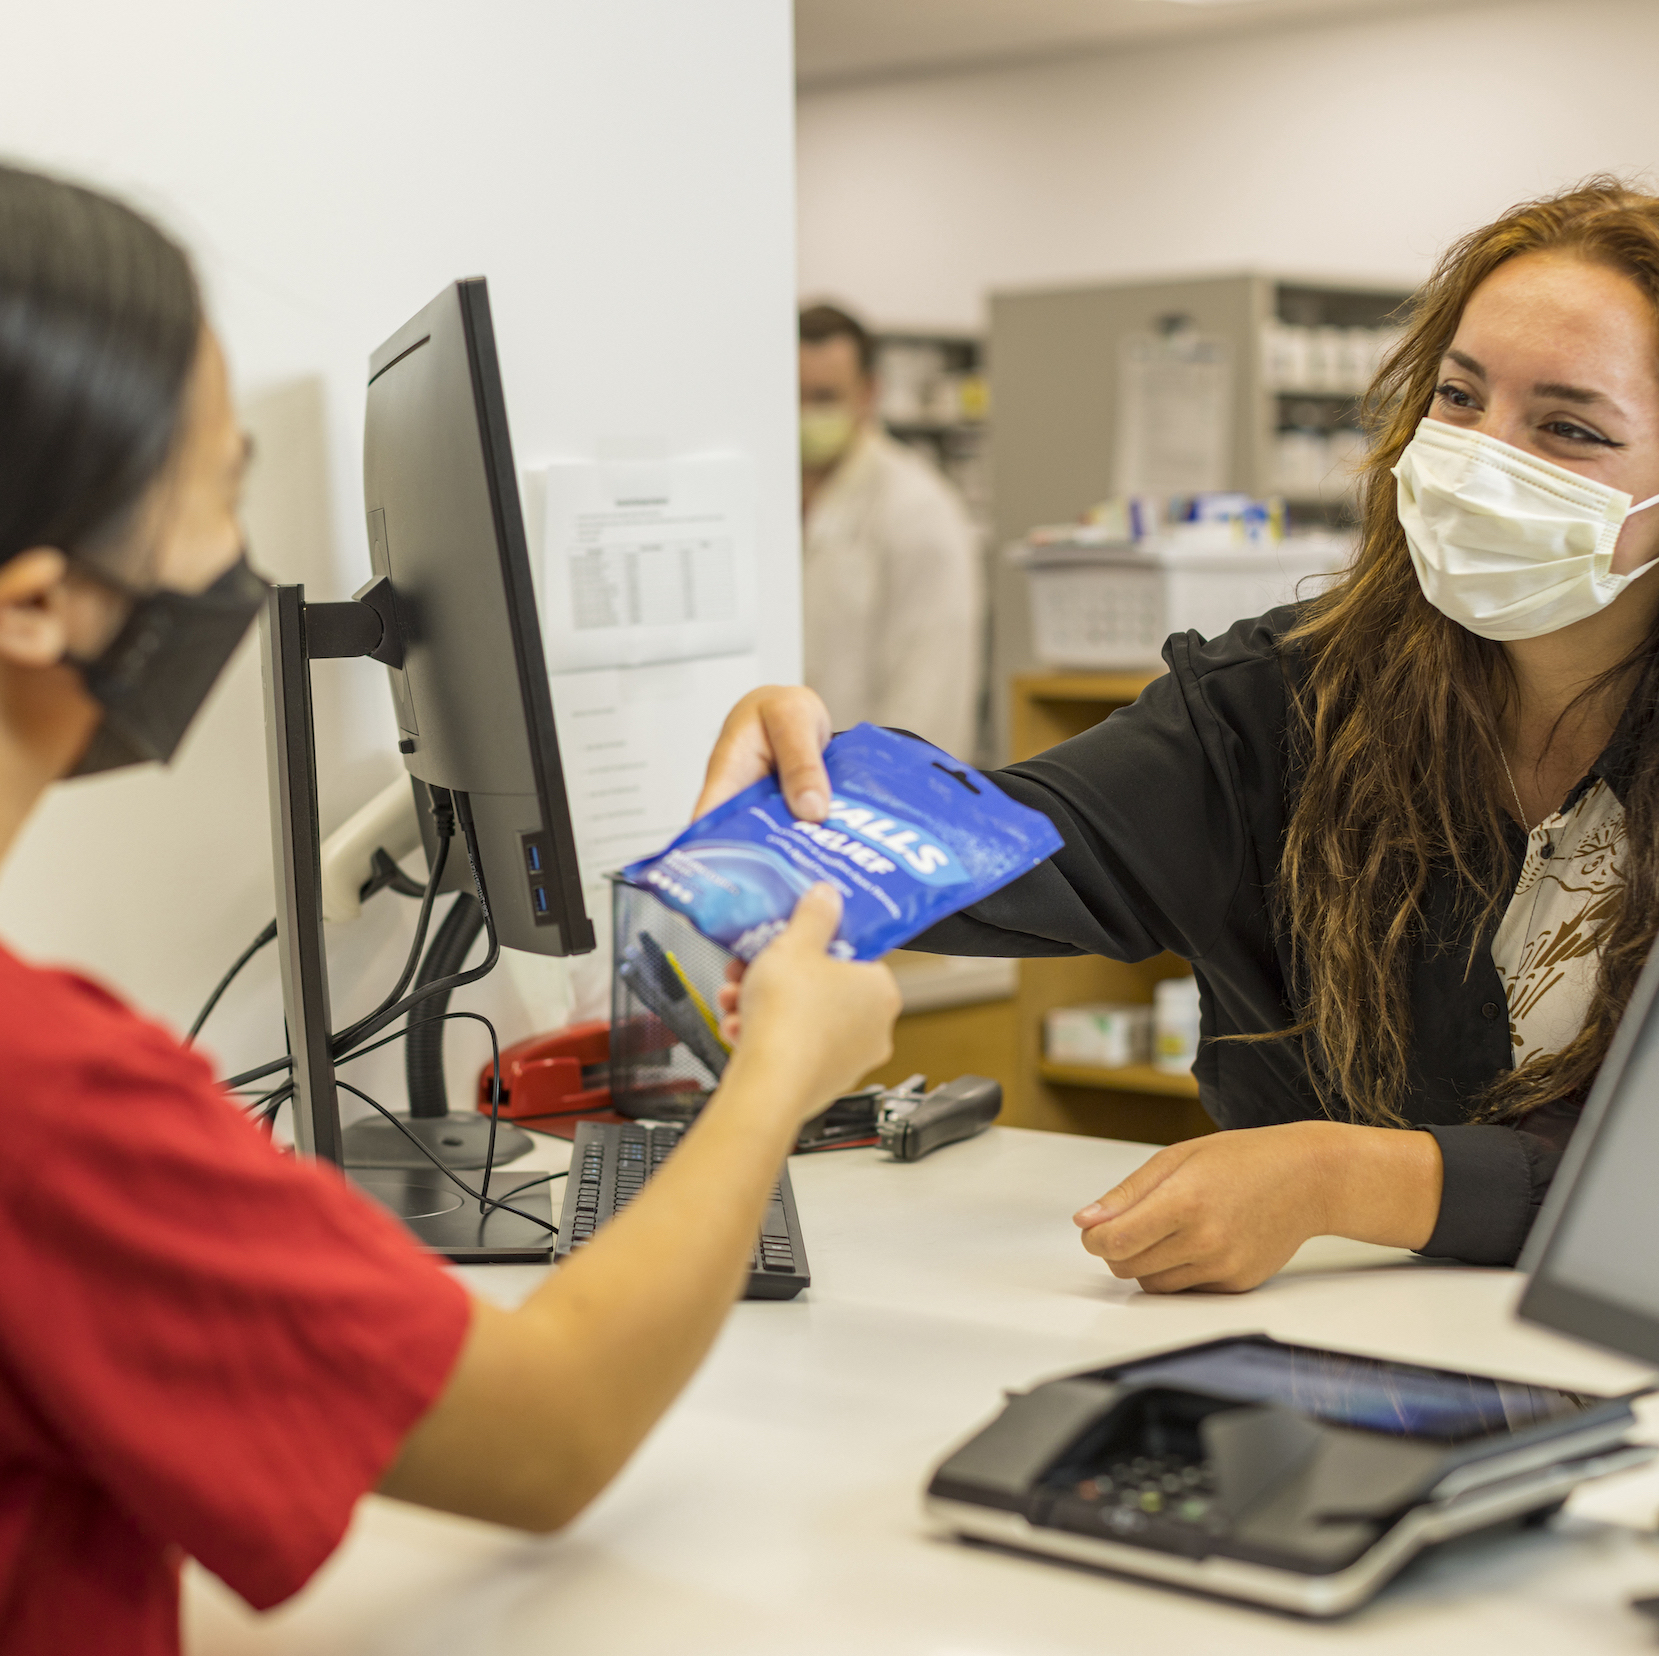 Save time and hassle by filling your prescriptions on campus. We offer easy prescription transfers, mobile app refills, 60- and 90-day supplies and free mail-order options.